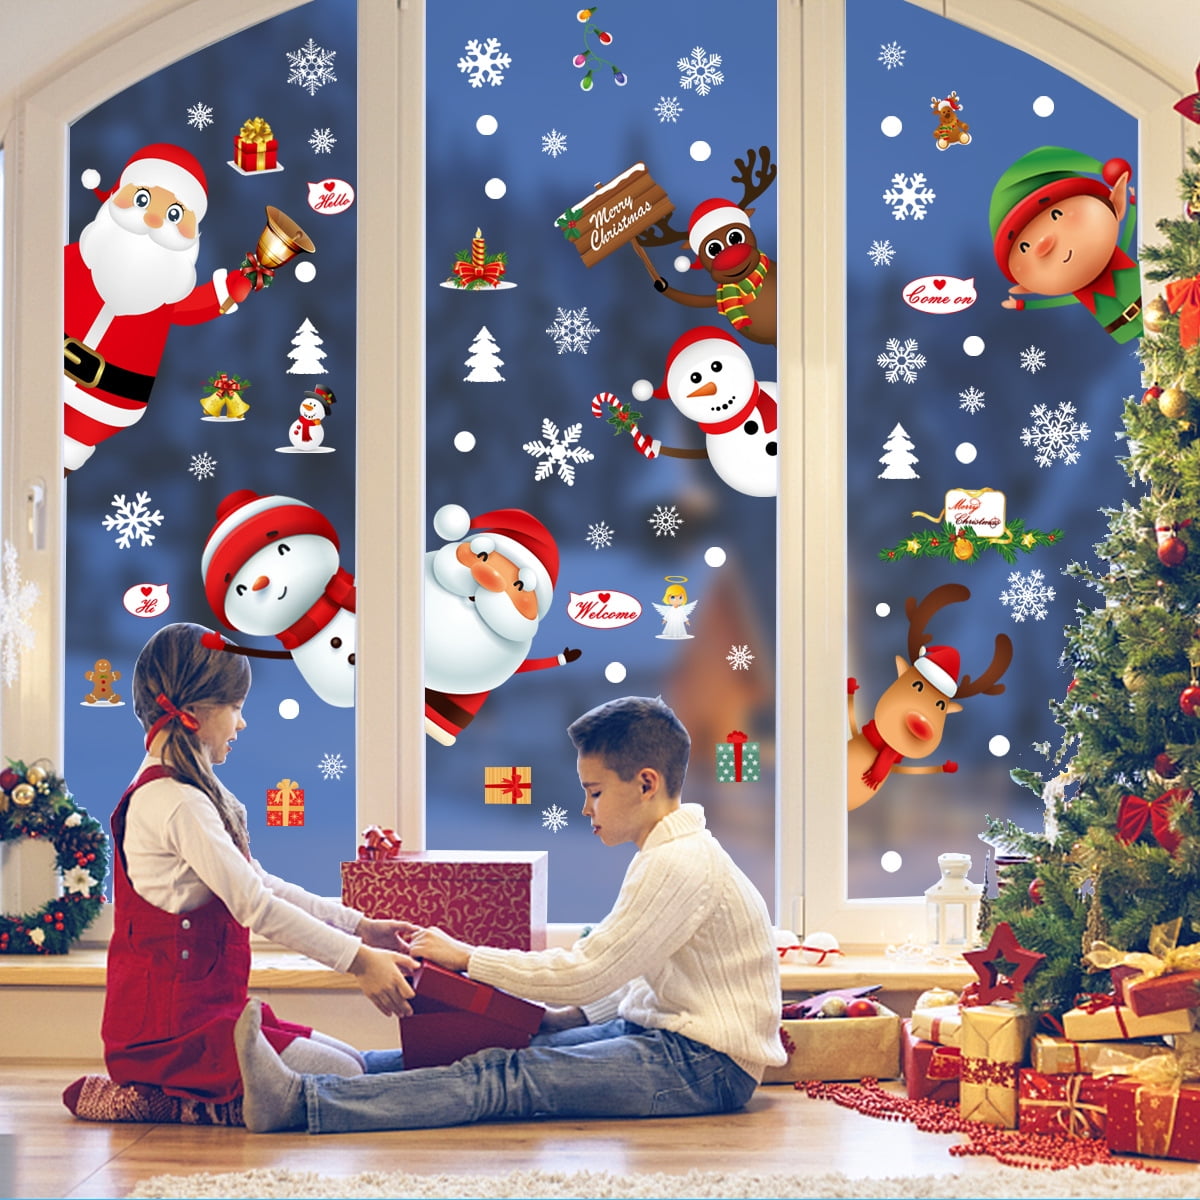 CINEEN 4 Sheet 94PCS Christmas Snowflake Window Clings Stickers for ...